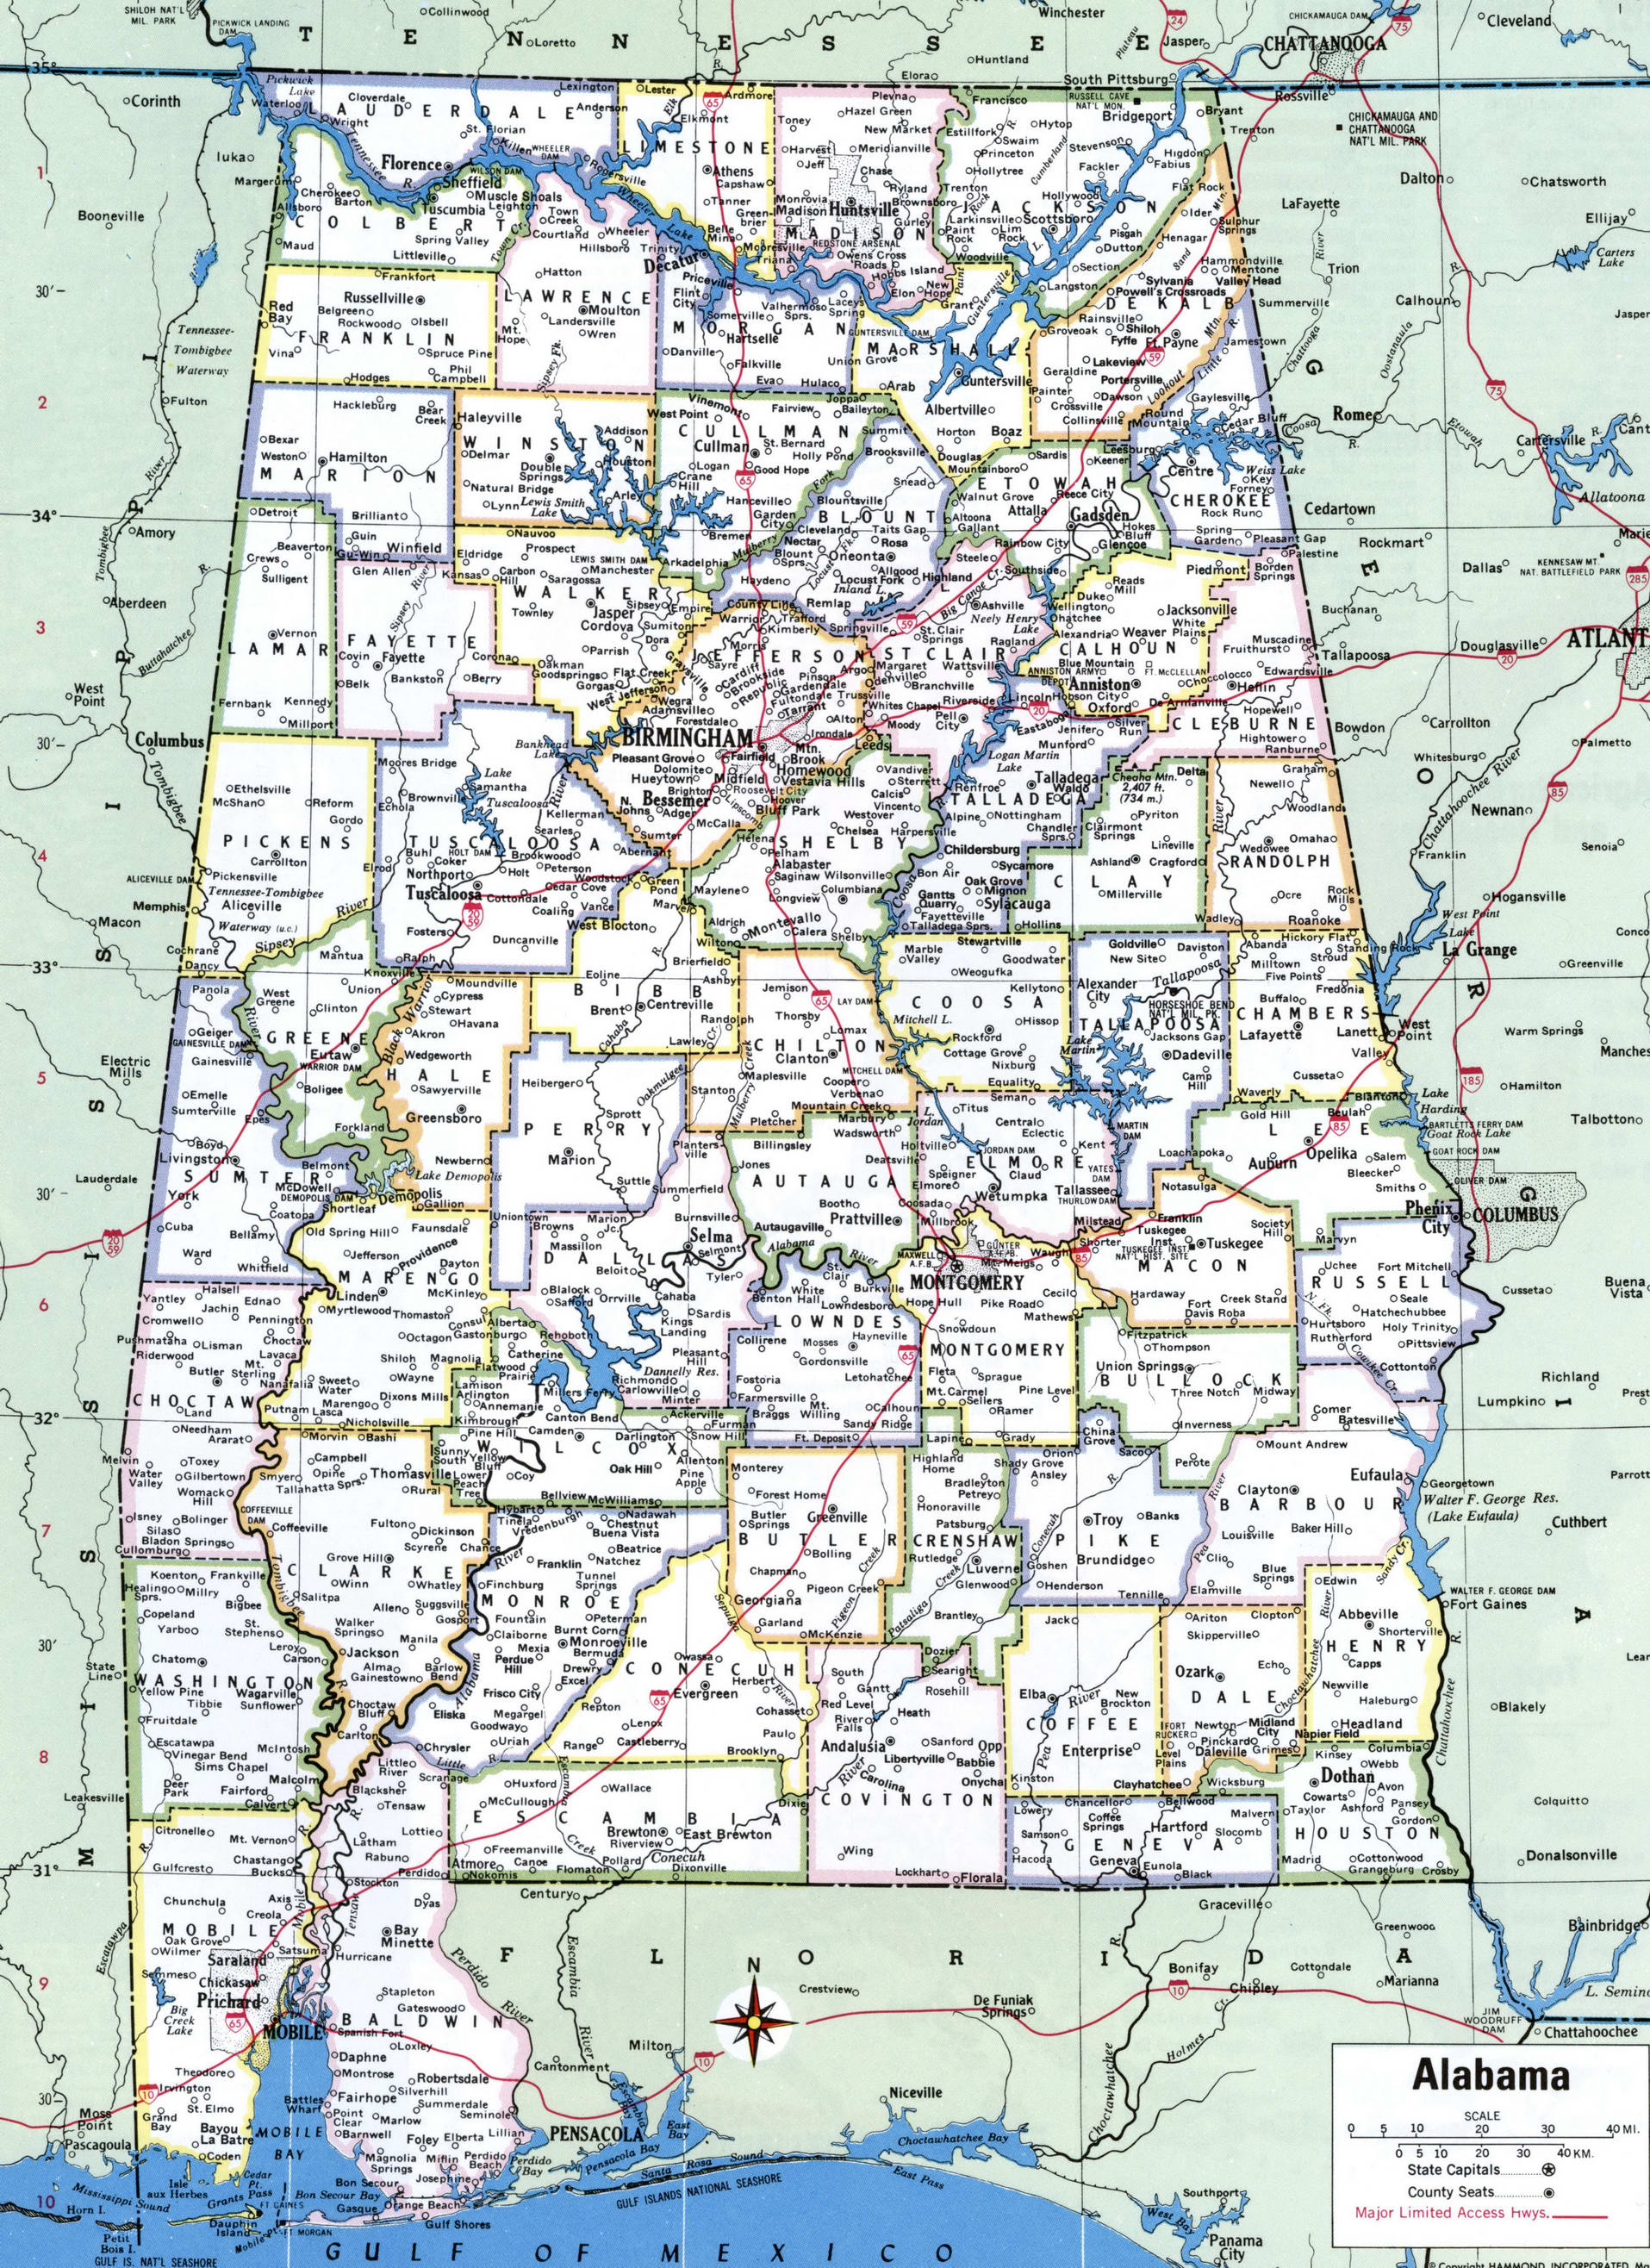 Alabama map with counties